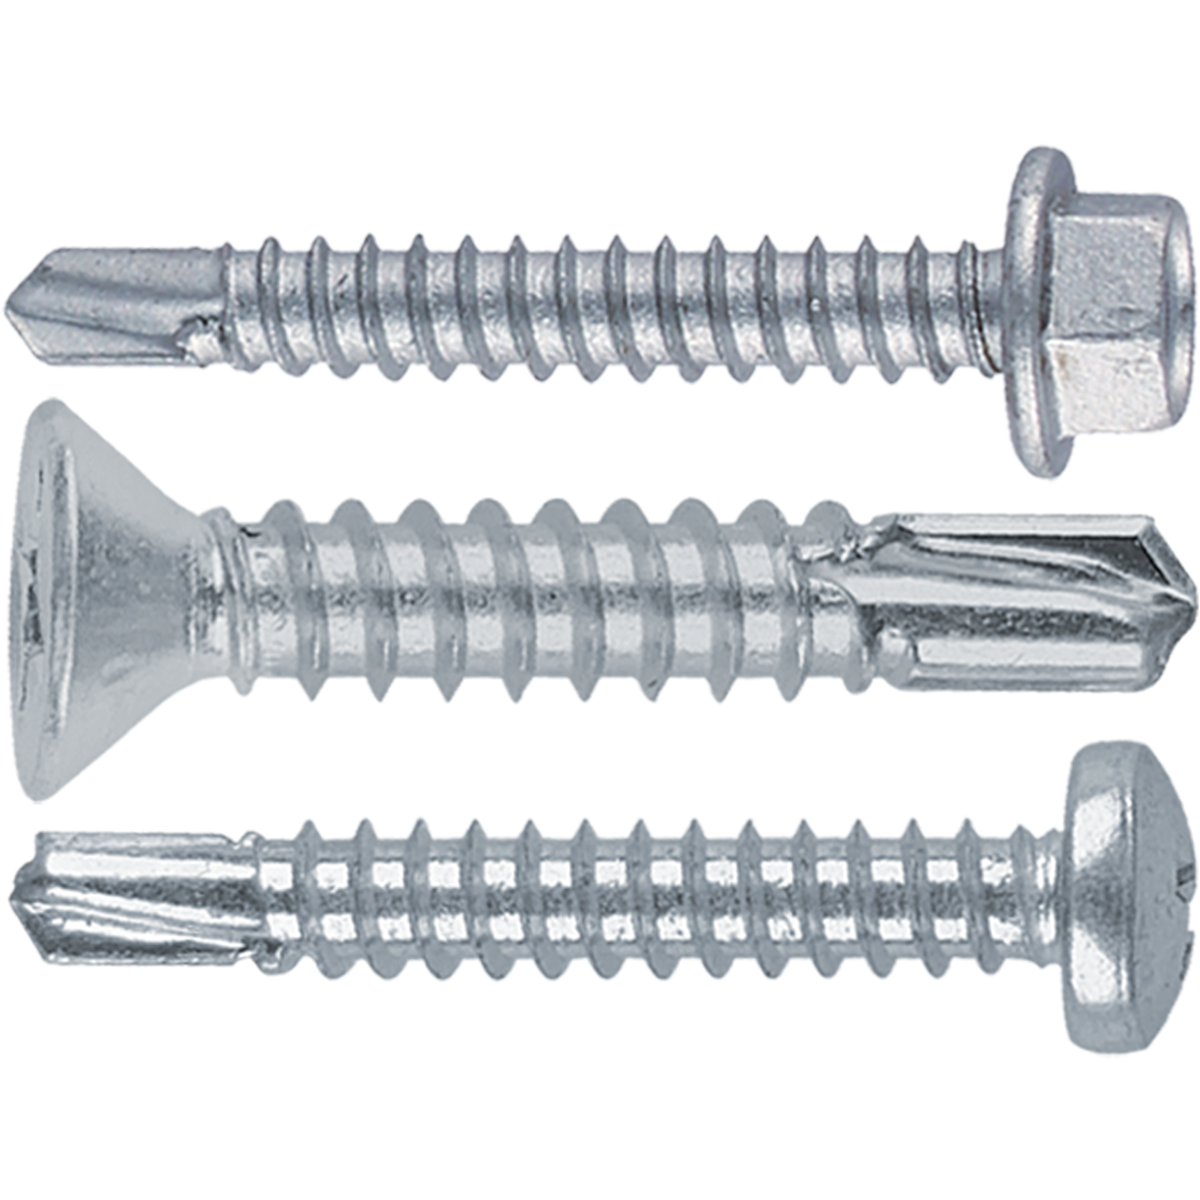 Self-drilling screws, a range of screws with a drill bit like point that helps penetrate material like steel and aluminium.